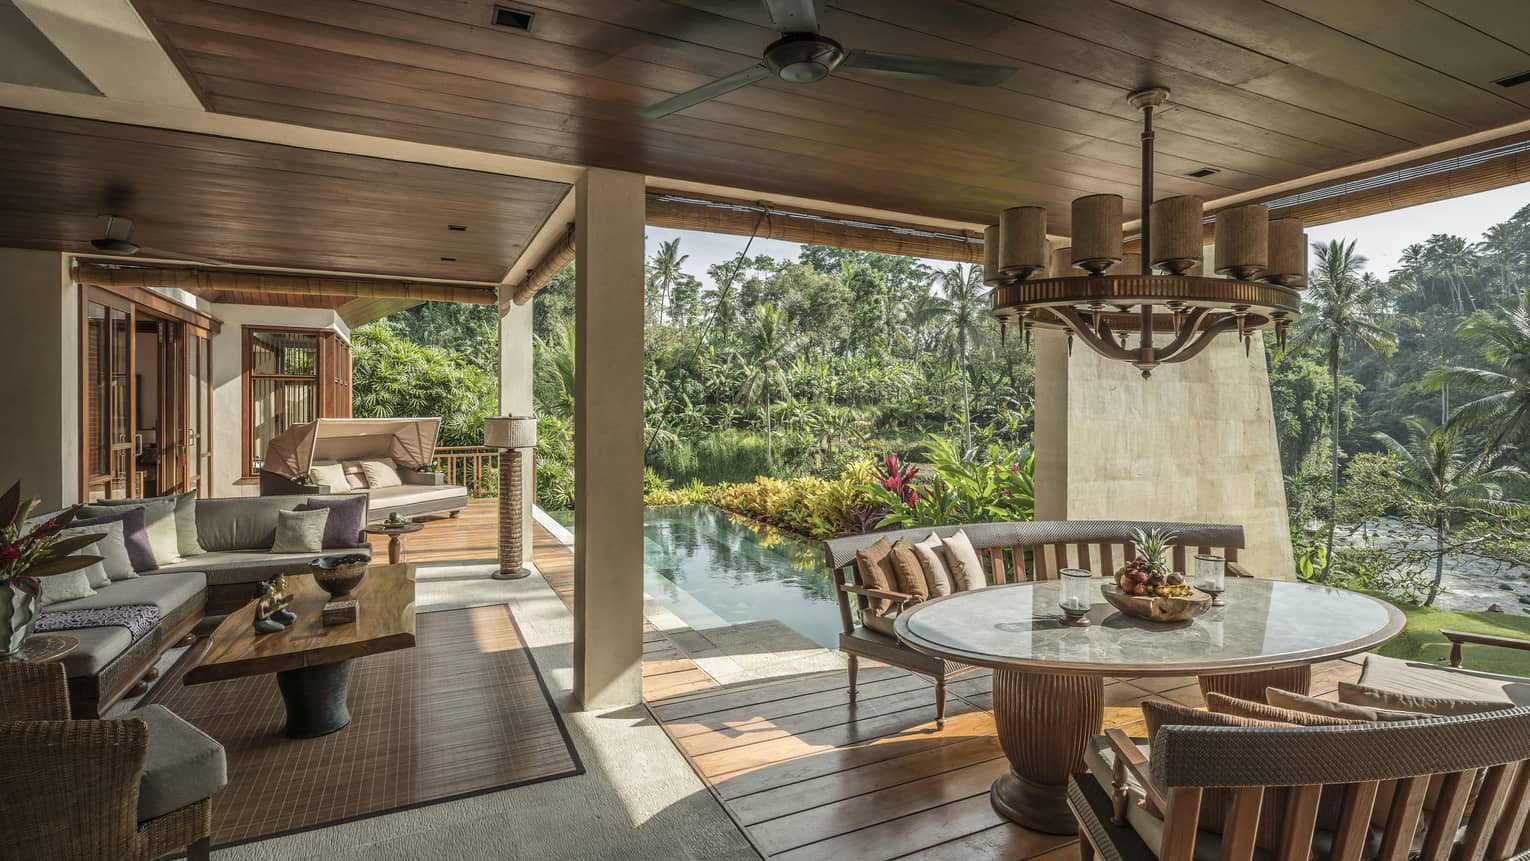 A villa with an outdoor patio and an infinity pool overlooking a river in Bali